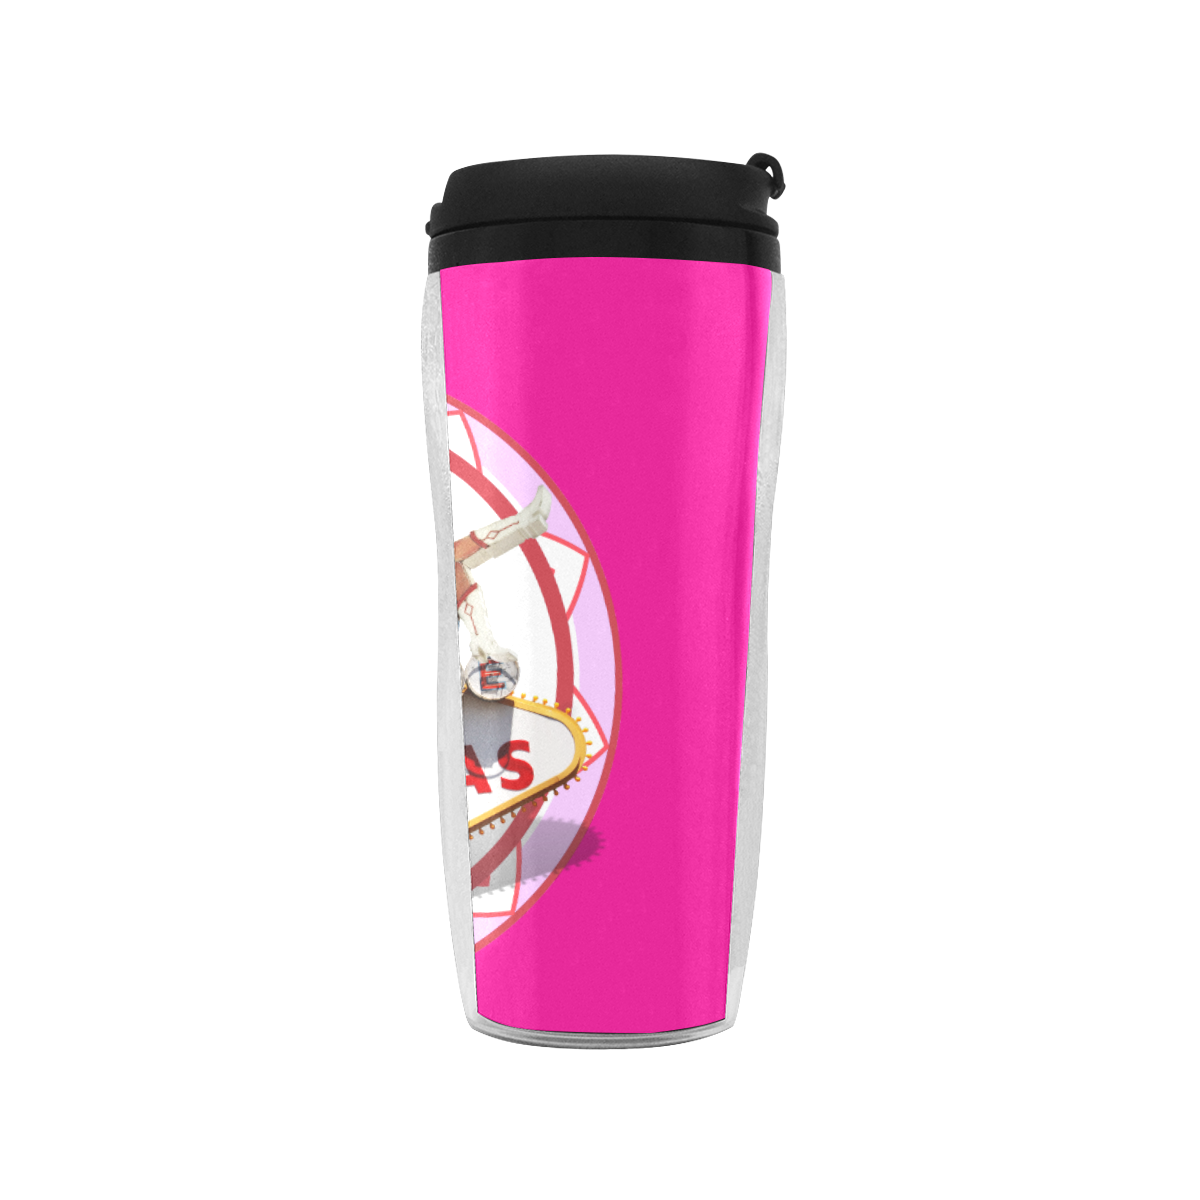 LasVegasIcons Poker Chip - Pink on Hot Pink Reusable Coffee Cup (11.8oz)